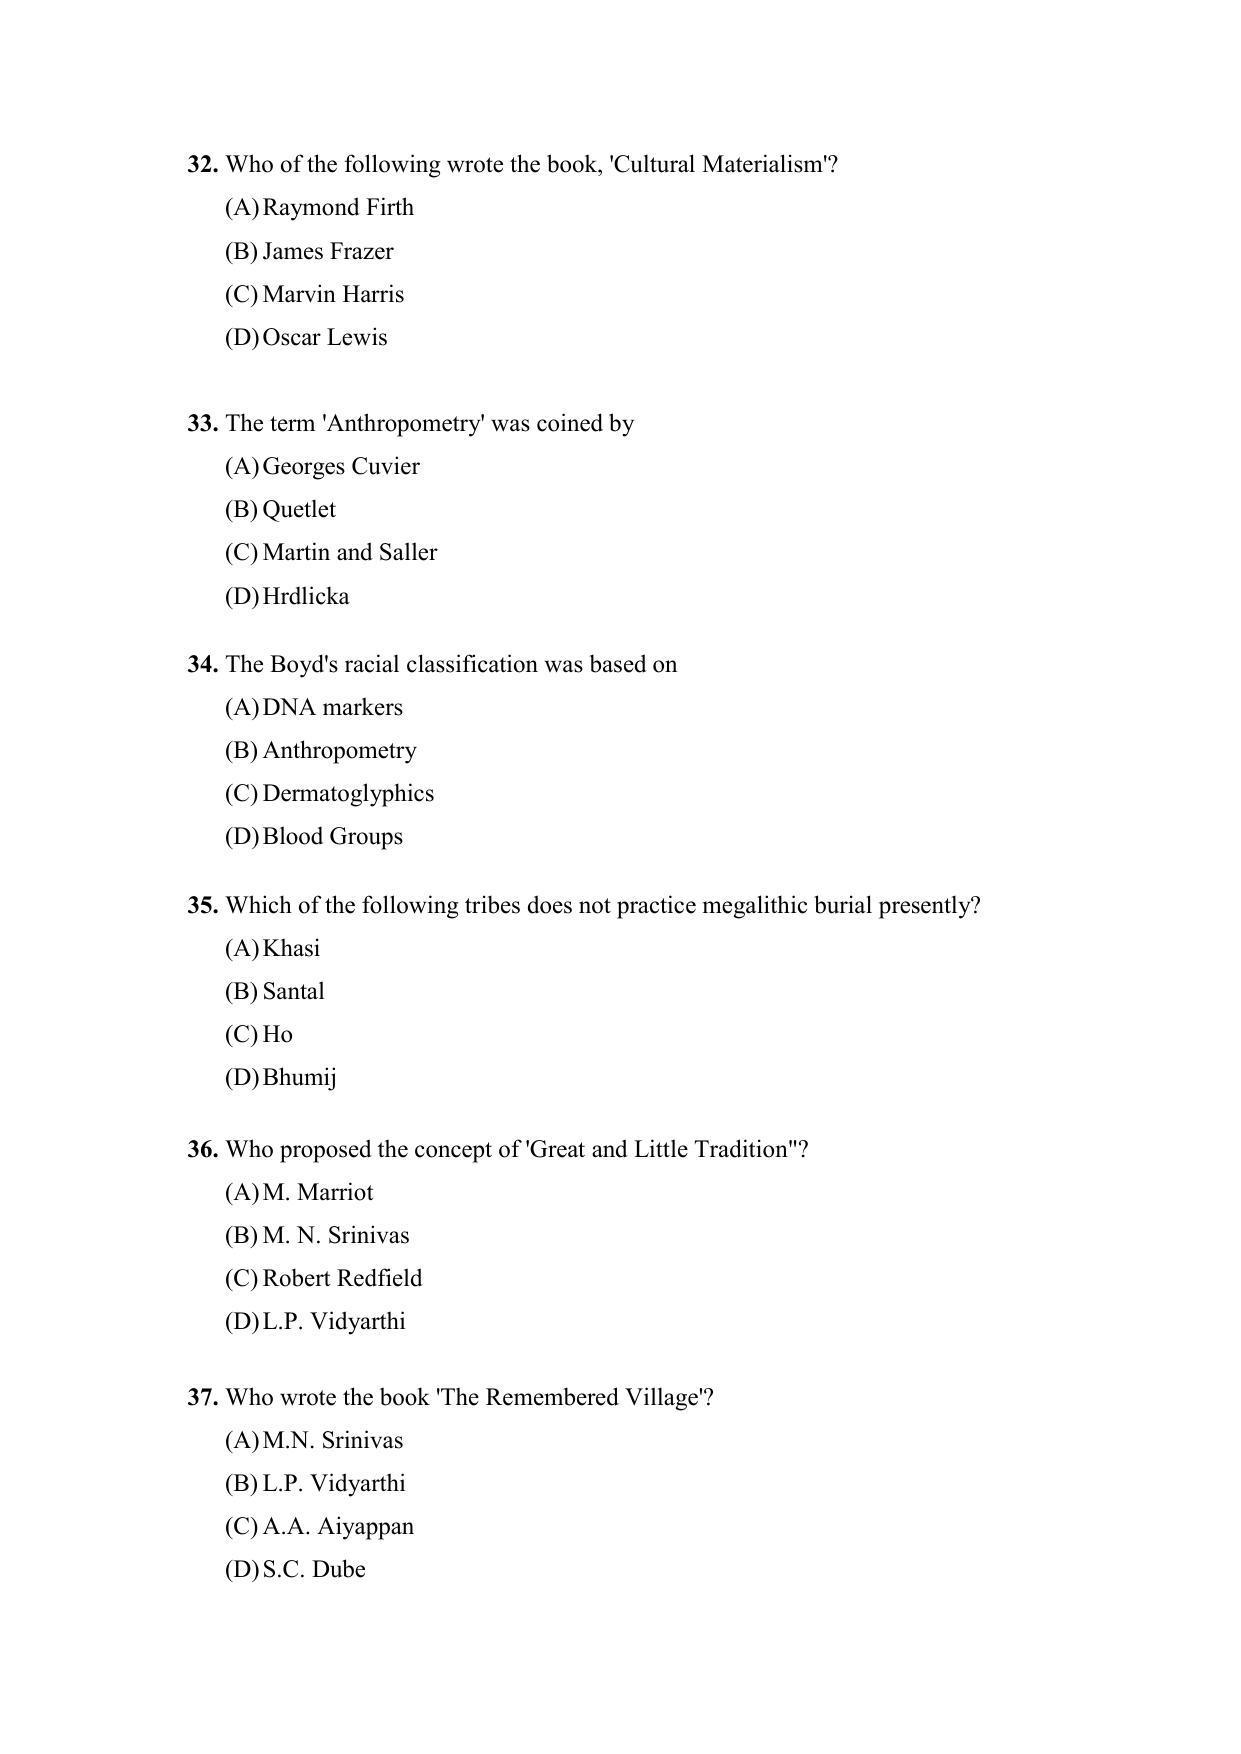 PU MPET Anthropology 2022 Question Papers - Page 7